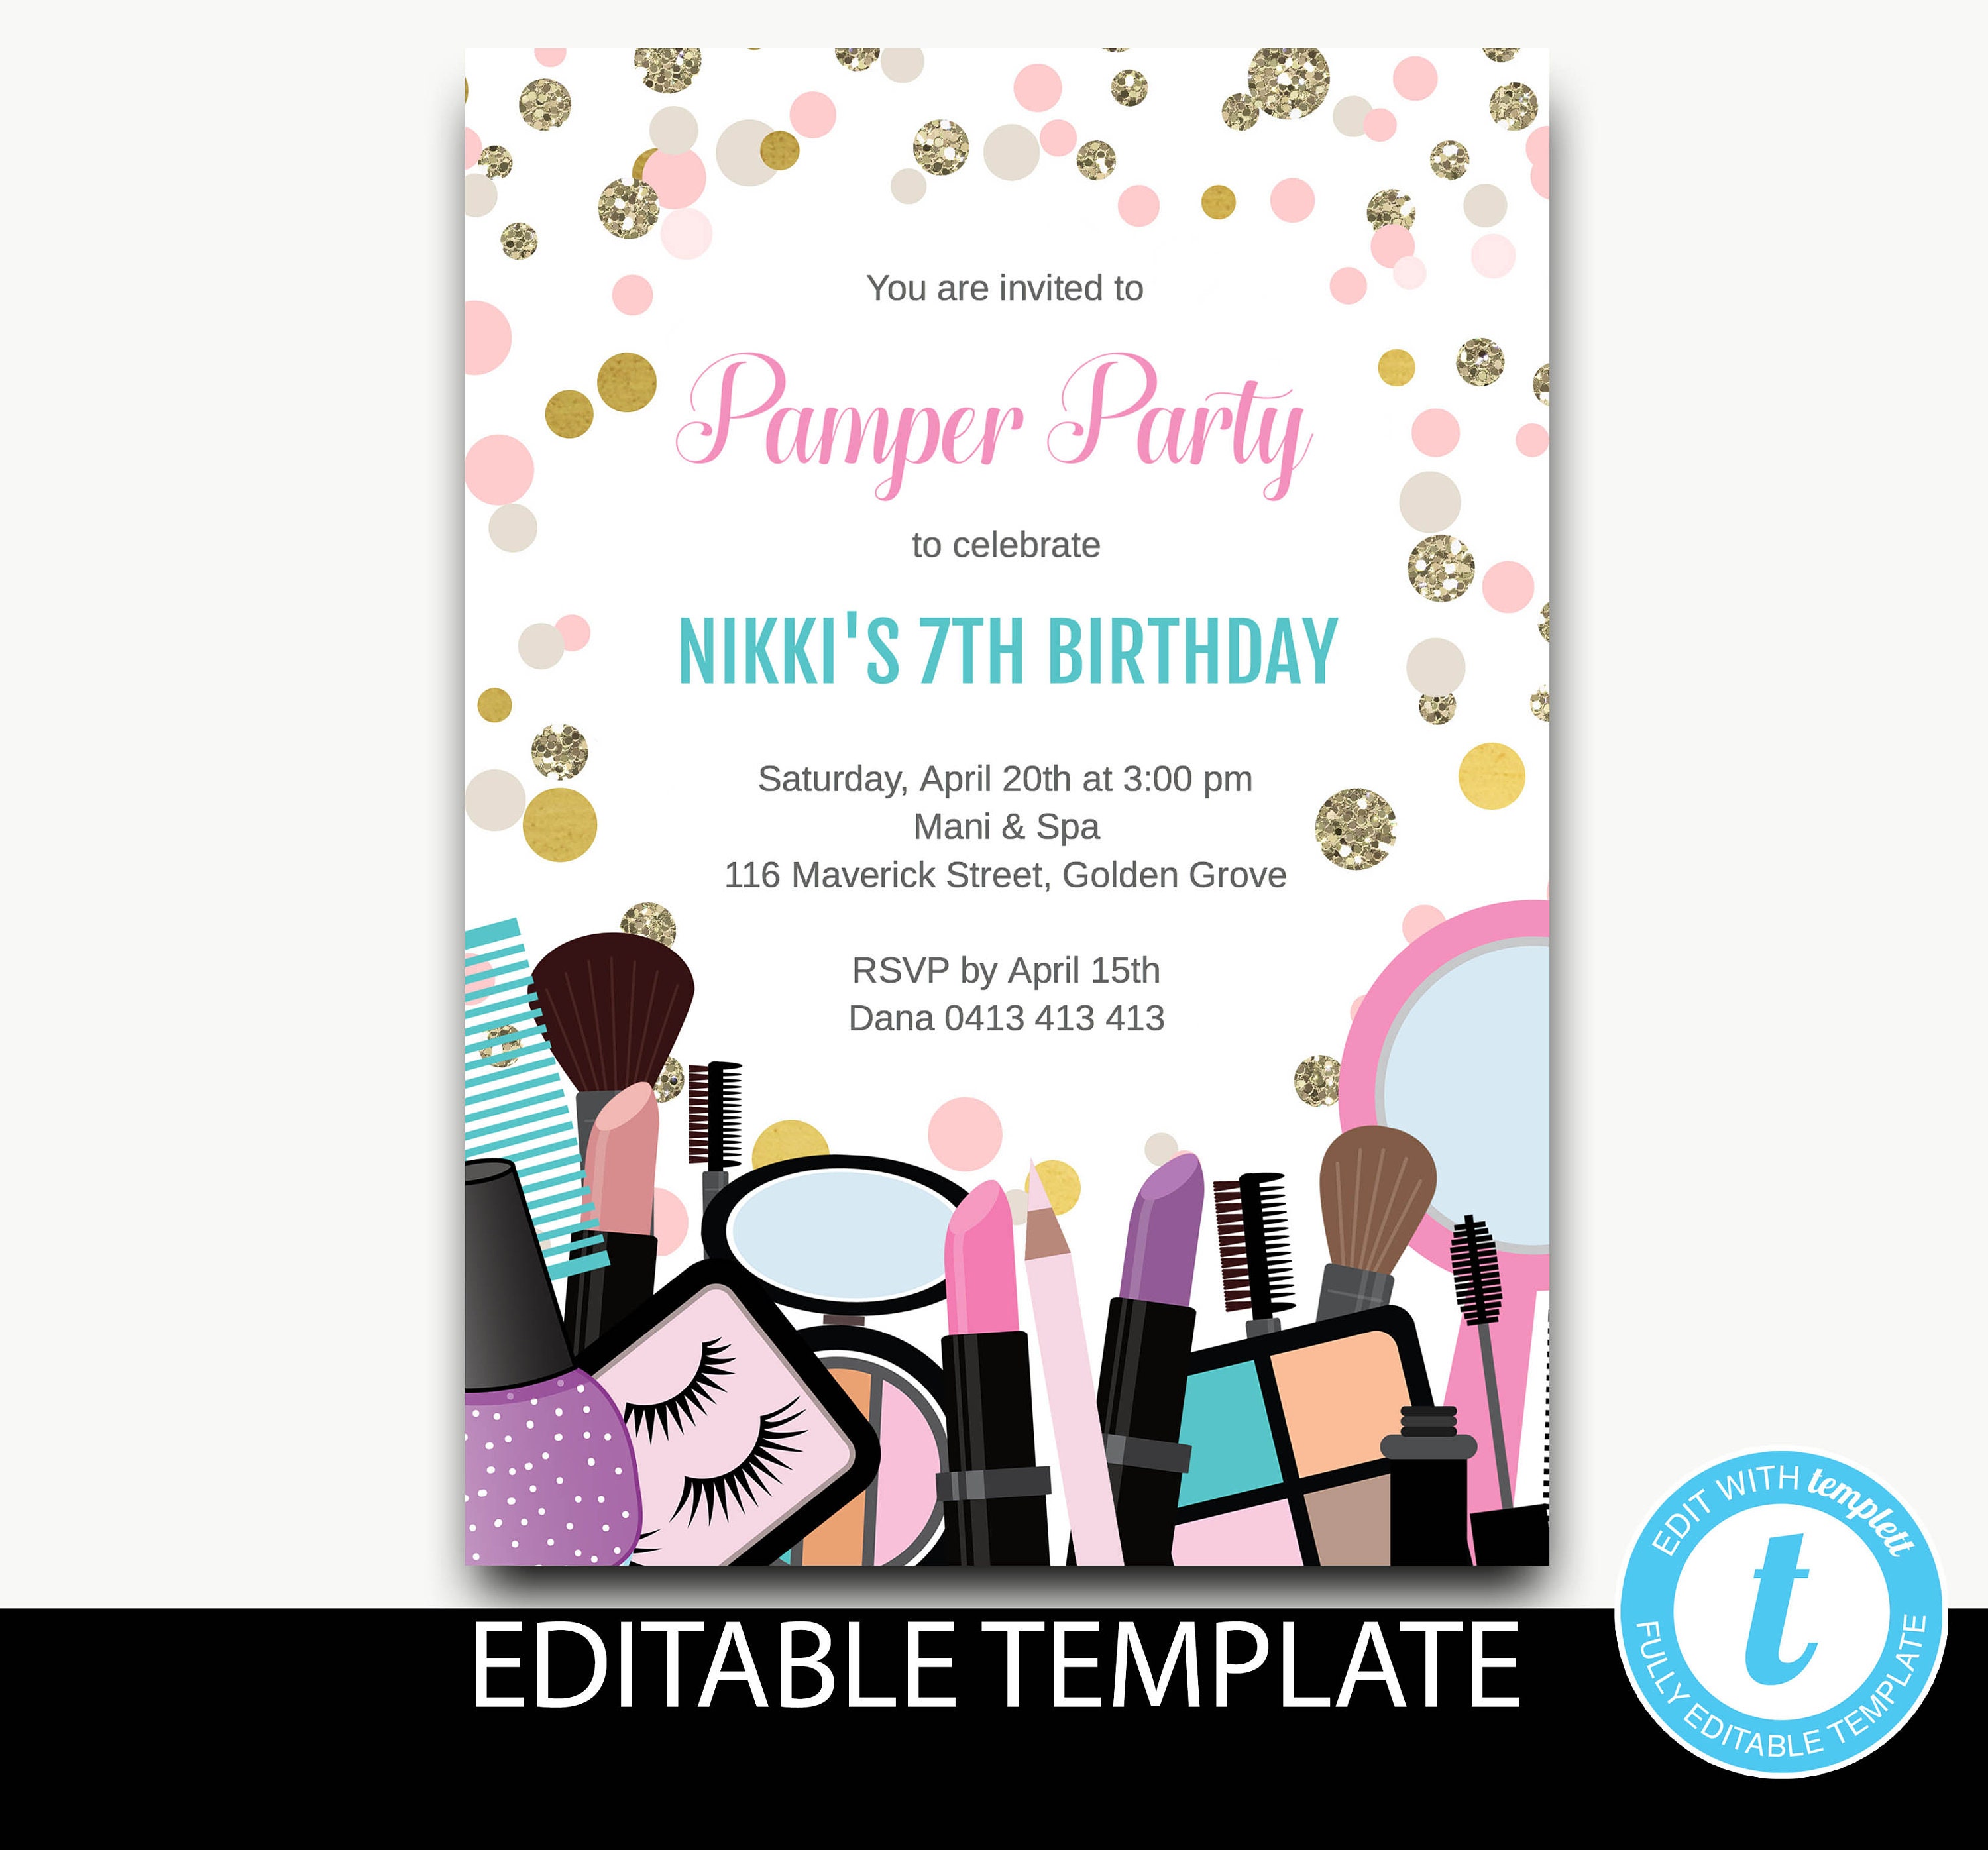 PAMPER PARTY INVITATIONS SPA BIRTHDAY INVITE BEAUTY FACIAL PARTY SUPPLIES GIRLS 